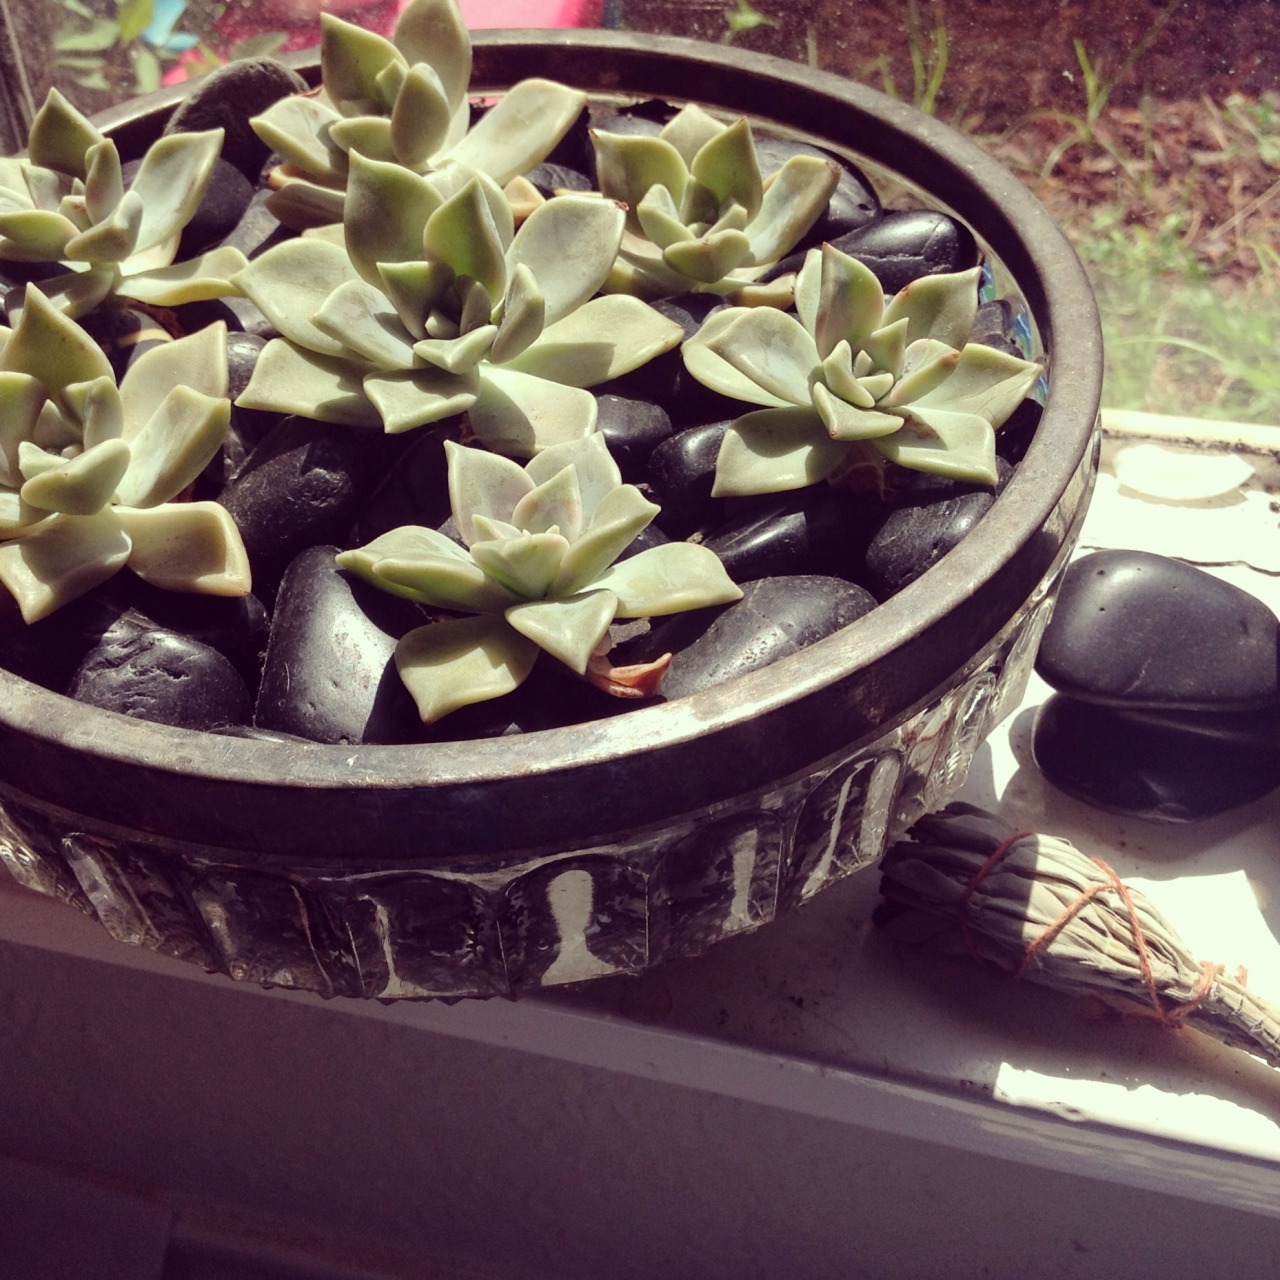 Earth Day Post - DIY Terrarium
“ Every Earth Day makes me want to get my hands dirty and plant something. Last year, it was…
”
View Post